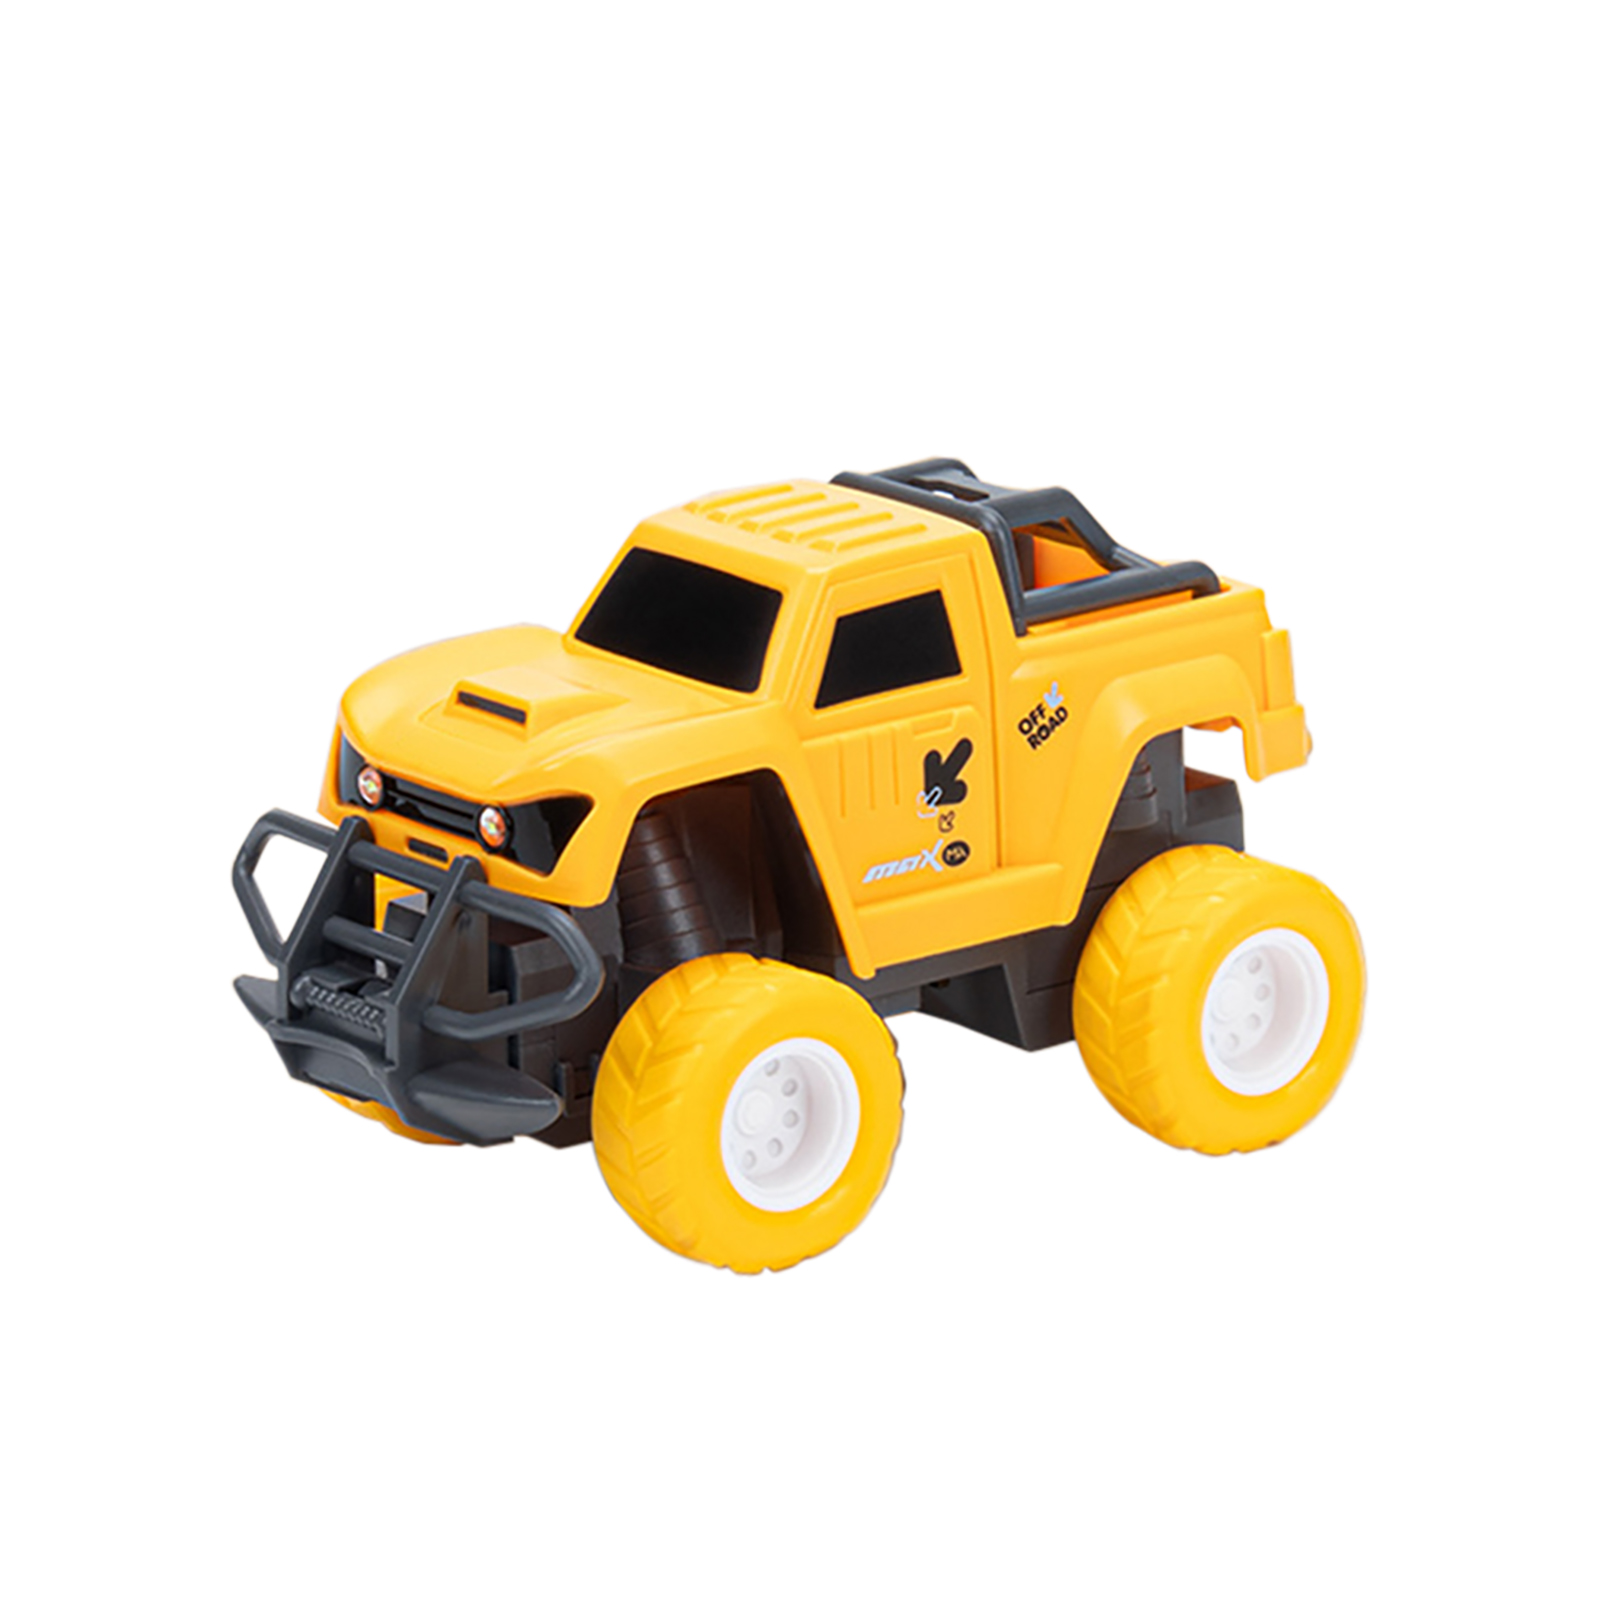 1/32 Mini RC Car 2.4G High Speed Off Road Vehicle Rechargeable Racing Drift Car Model Toys Christmas Birthday Gifts For Boys Girls